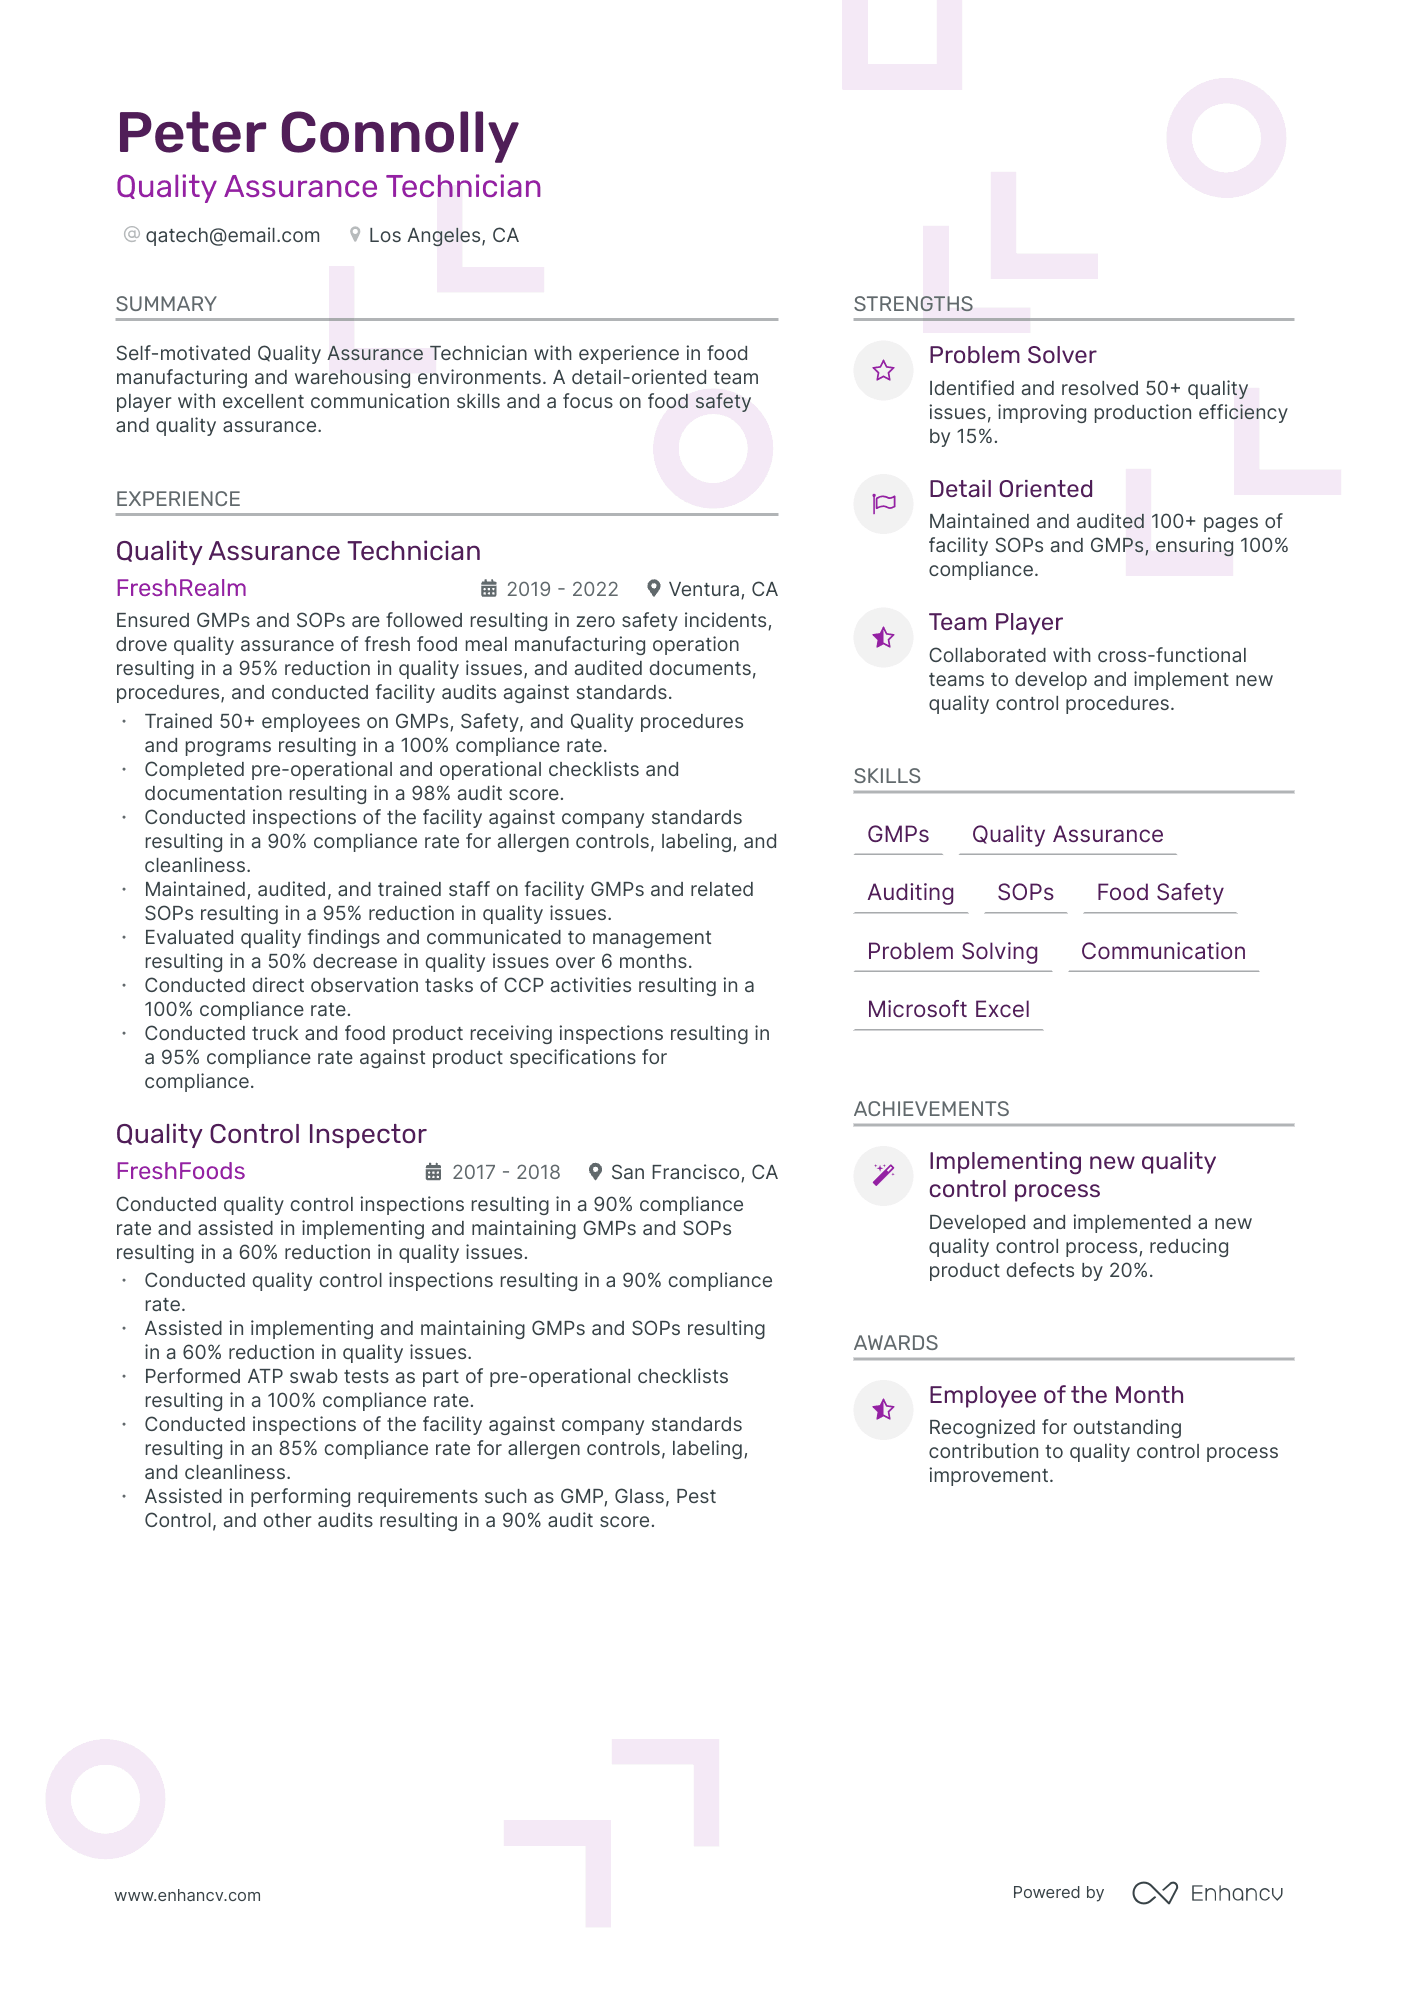 Quality Assurance Technician resume example